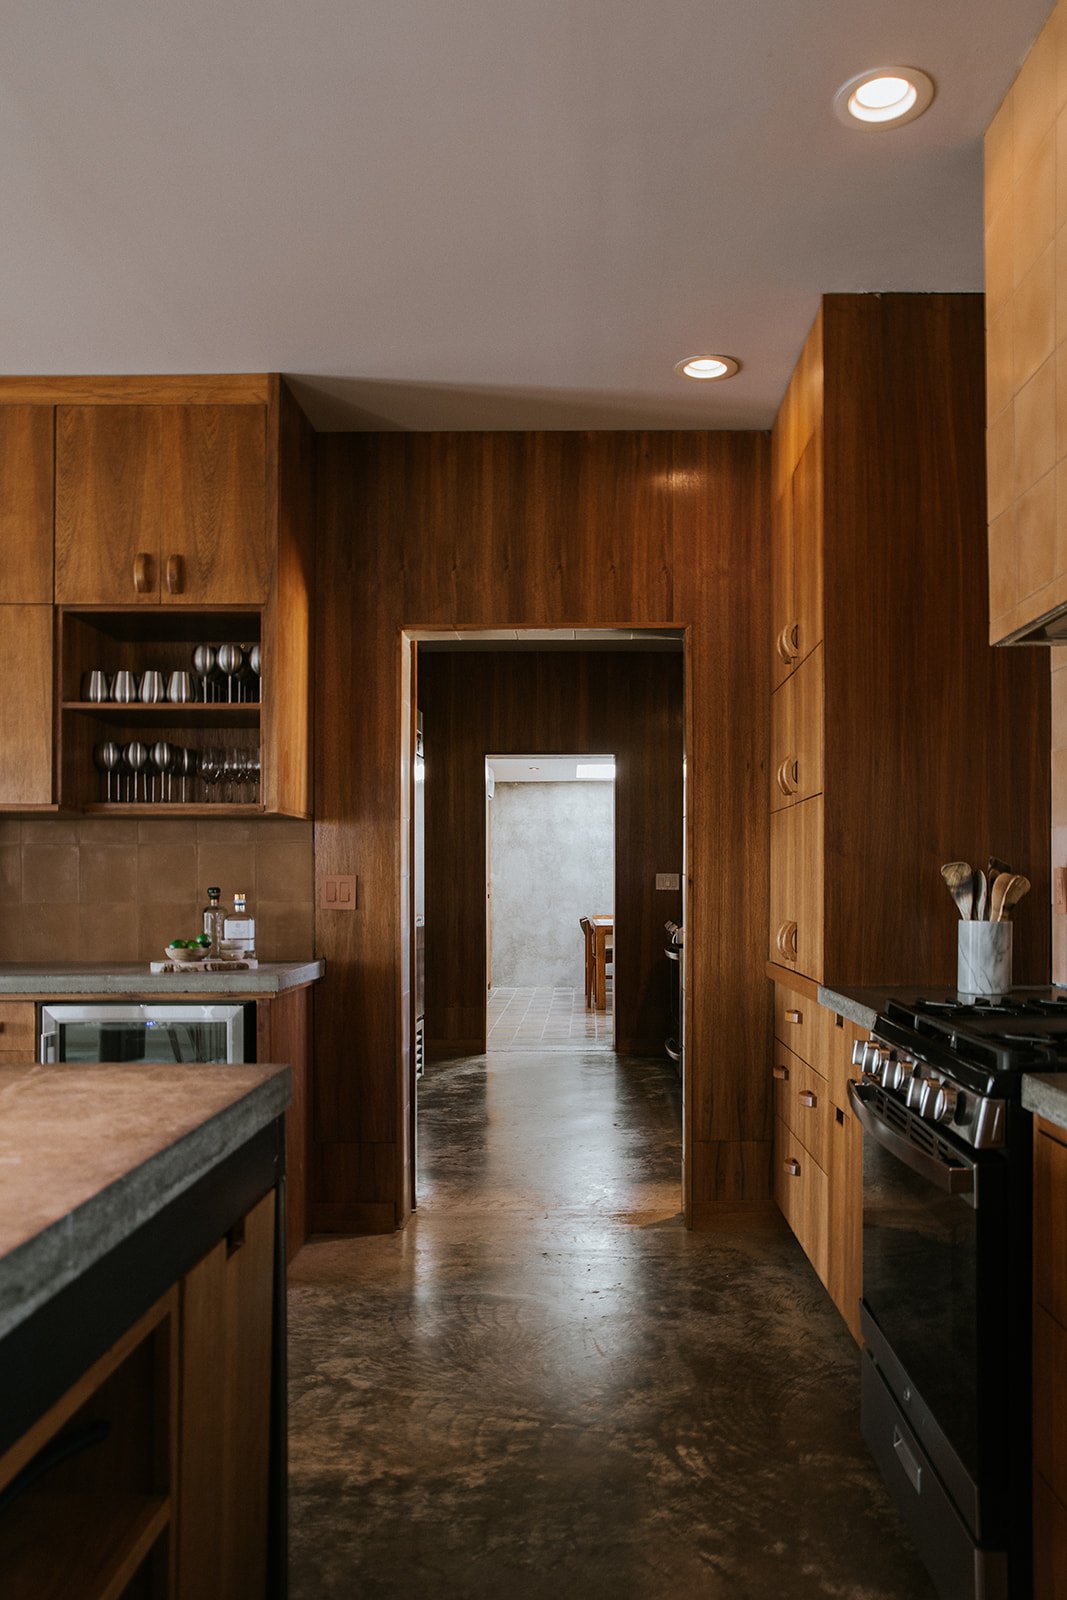 secondary kitchen has designated fridge and pantry space for each casita